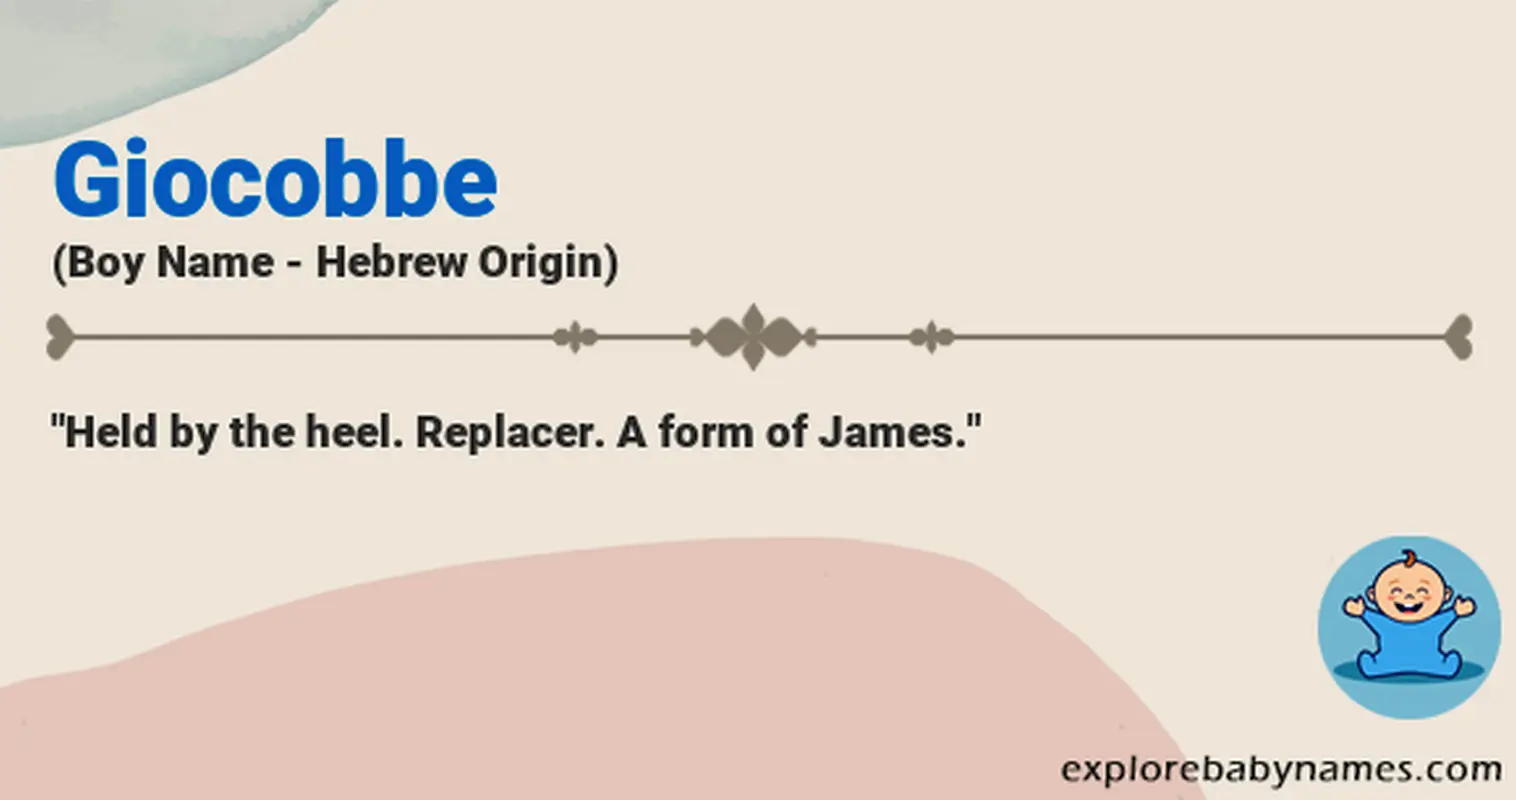 Meaning of Giocobbe